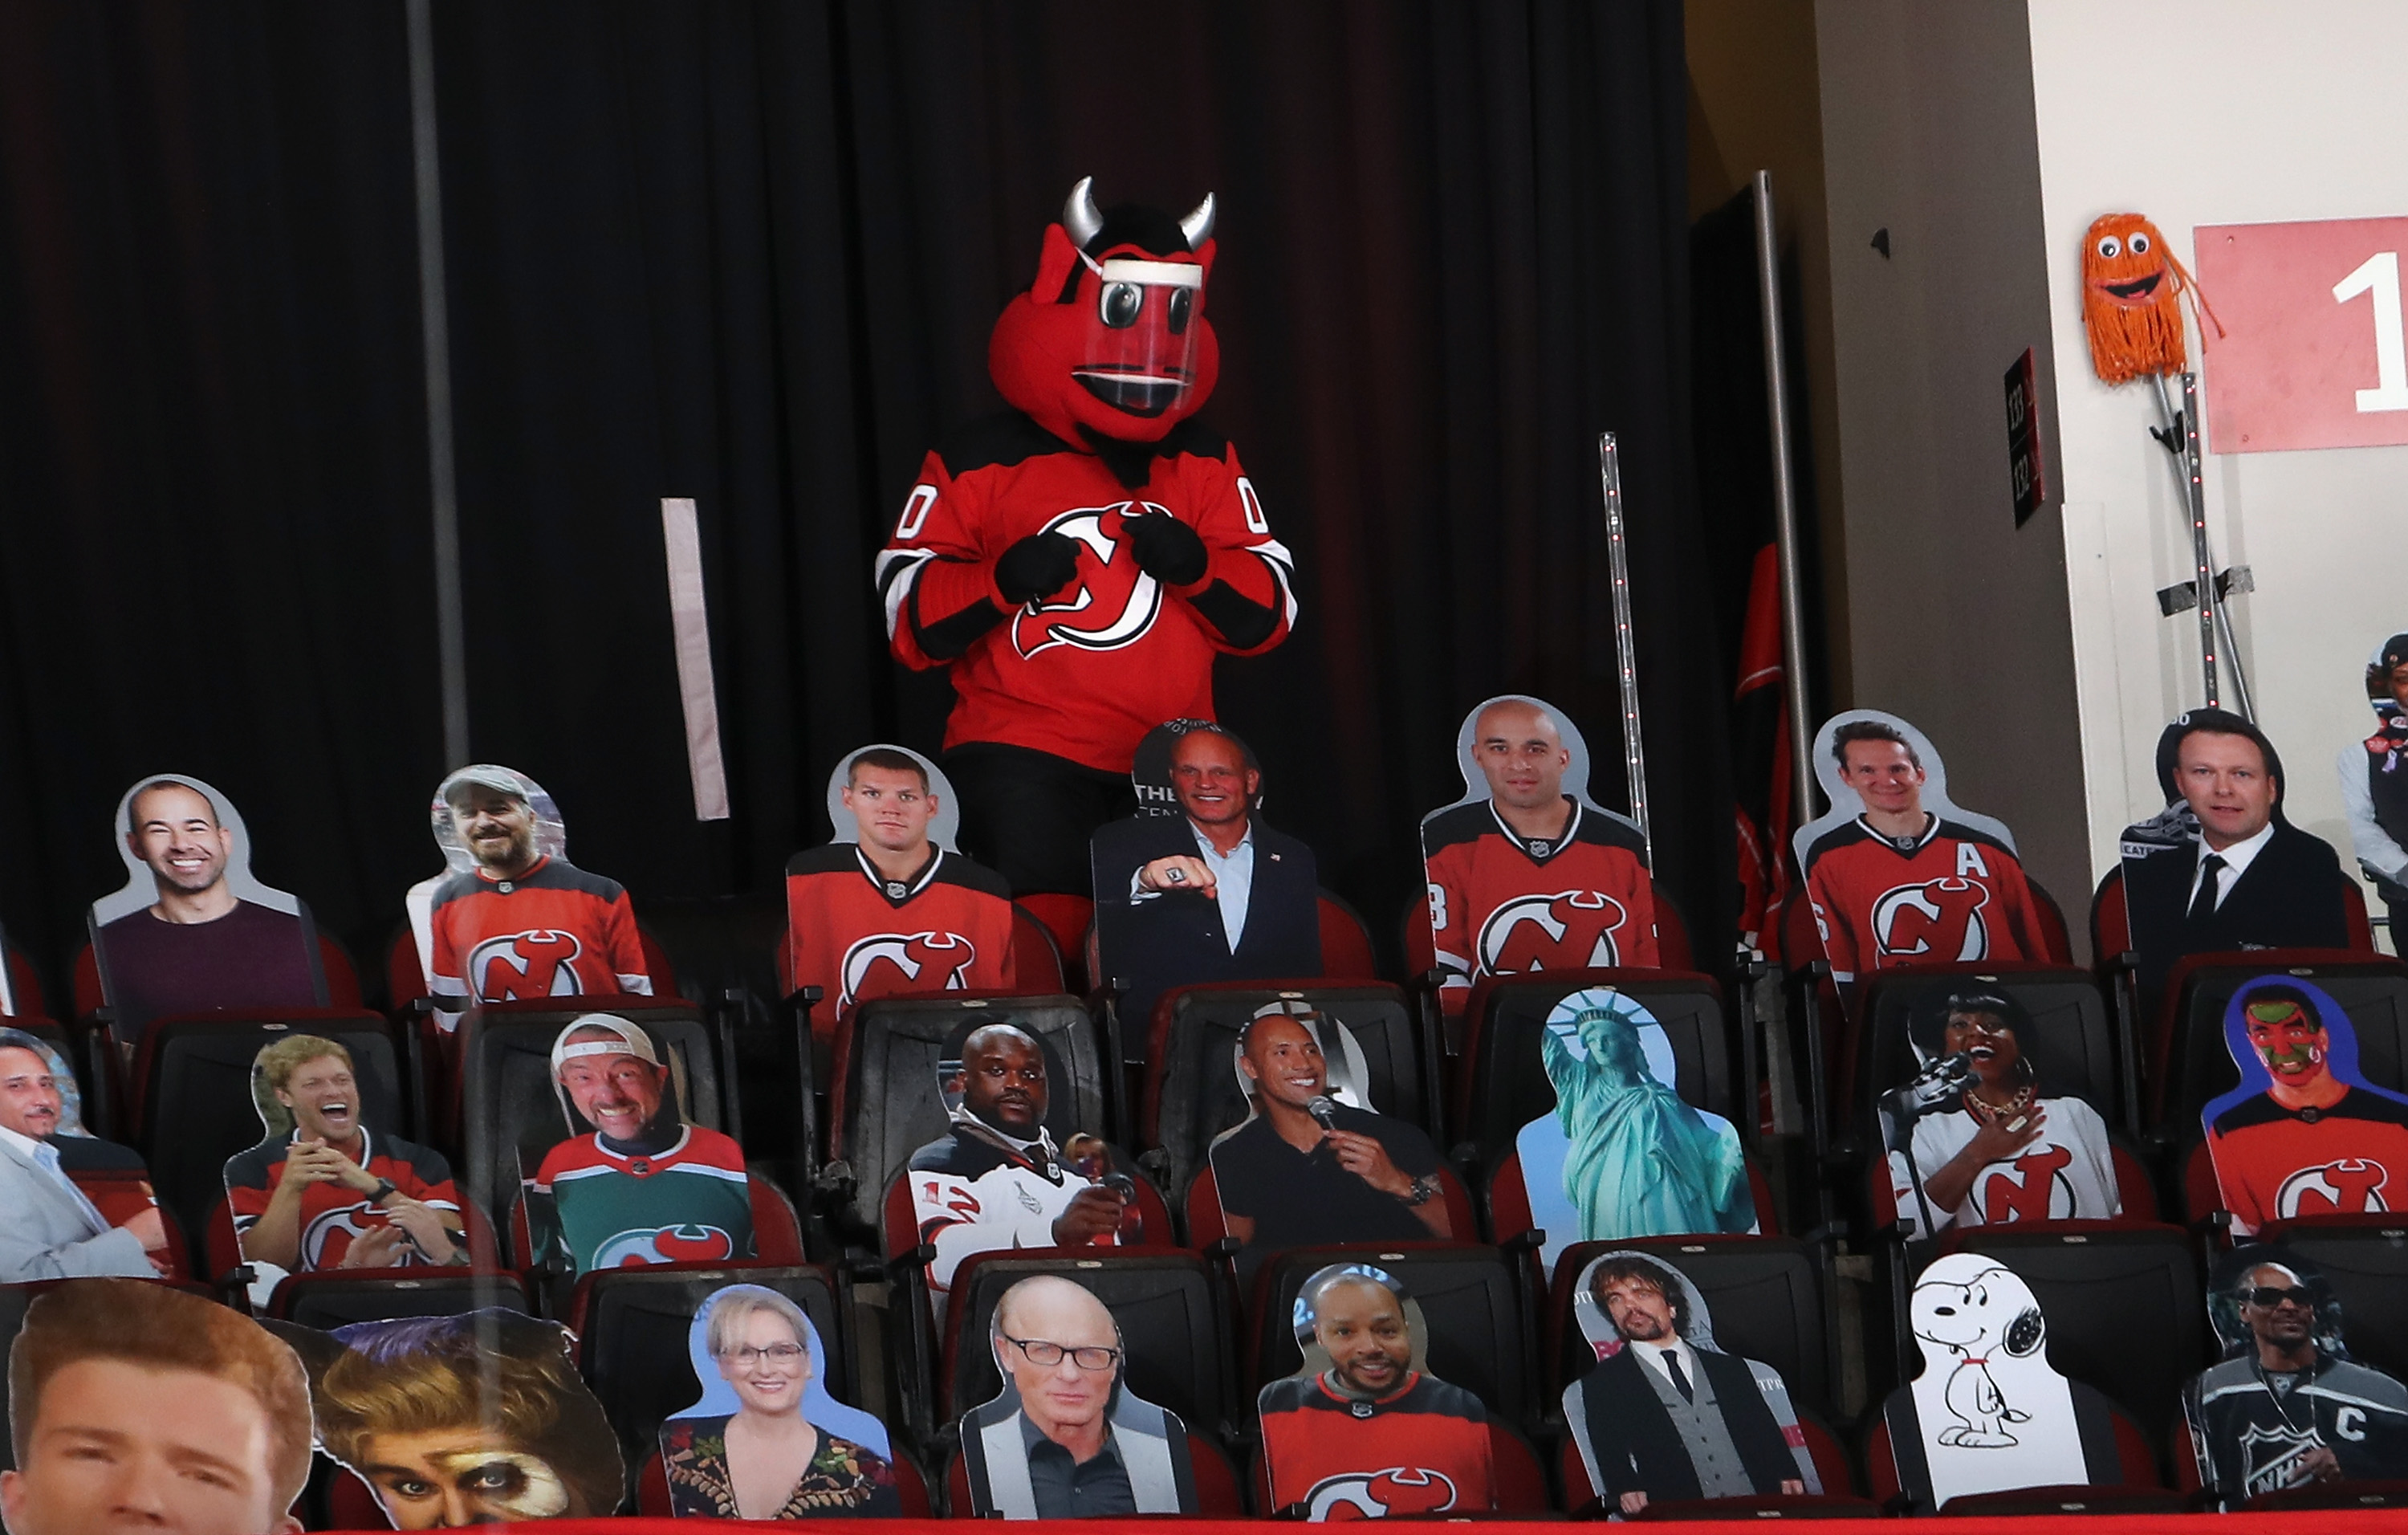 The New Jersey Devil stands in the last row of the arena surrounded by cardboard cut-outs